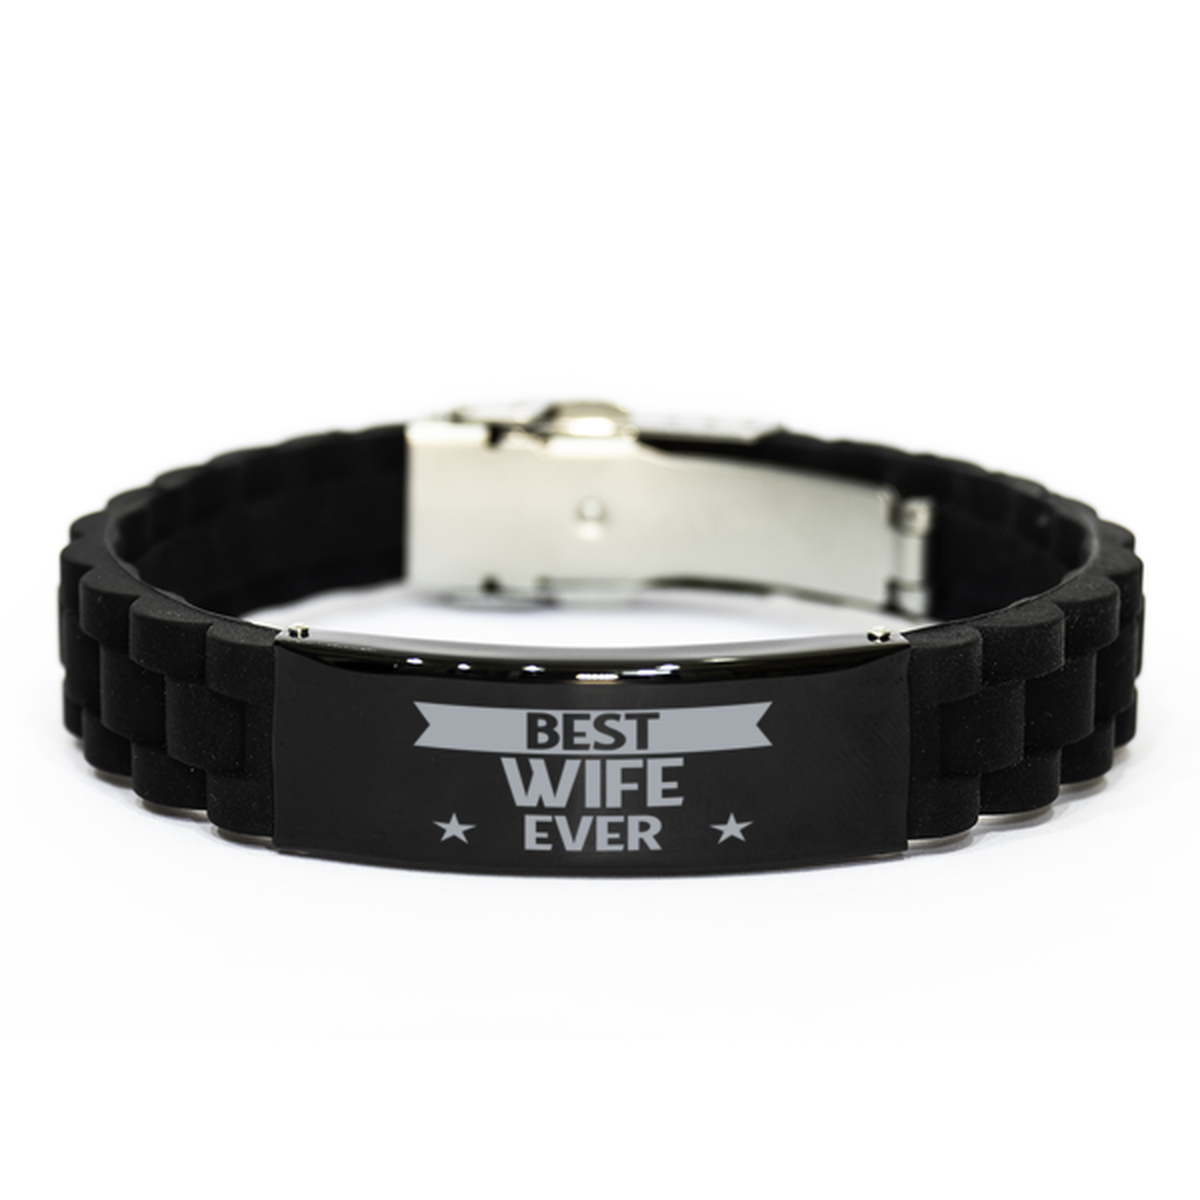 Best Wife Ever Wife Gifts, Funny Black Engraved Bracelet For Wife, Family Gifts For Women